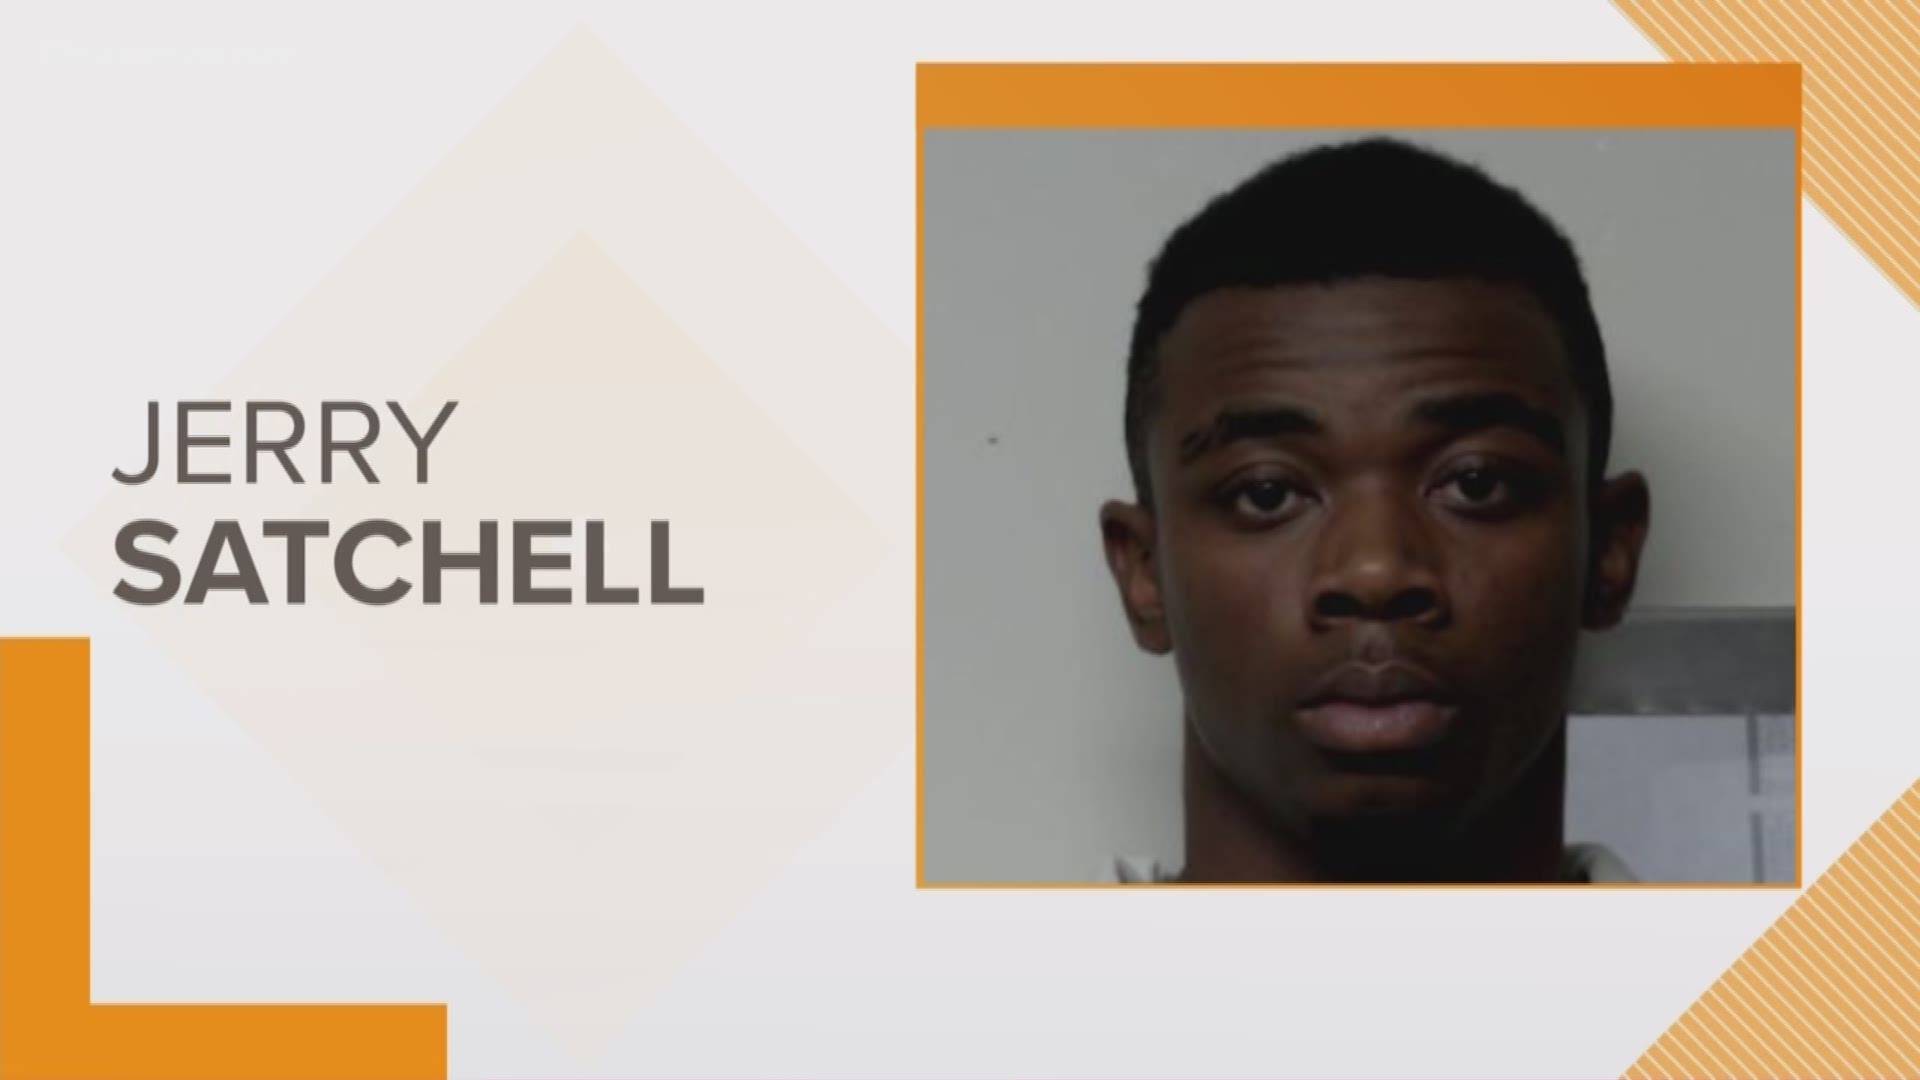 20-year-old Jerry A. Satchell faces felony charges for abduction, destruction of property and assault.